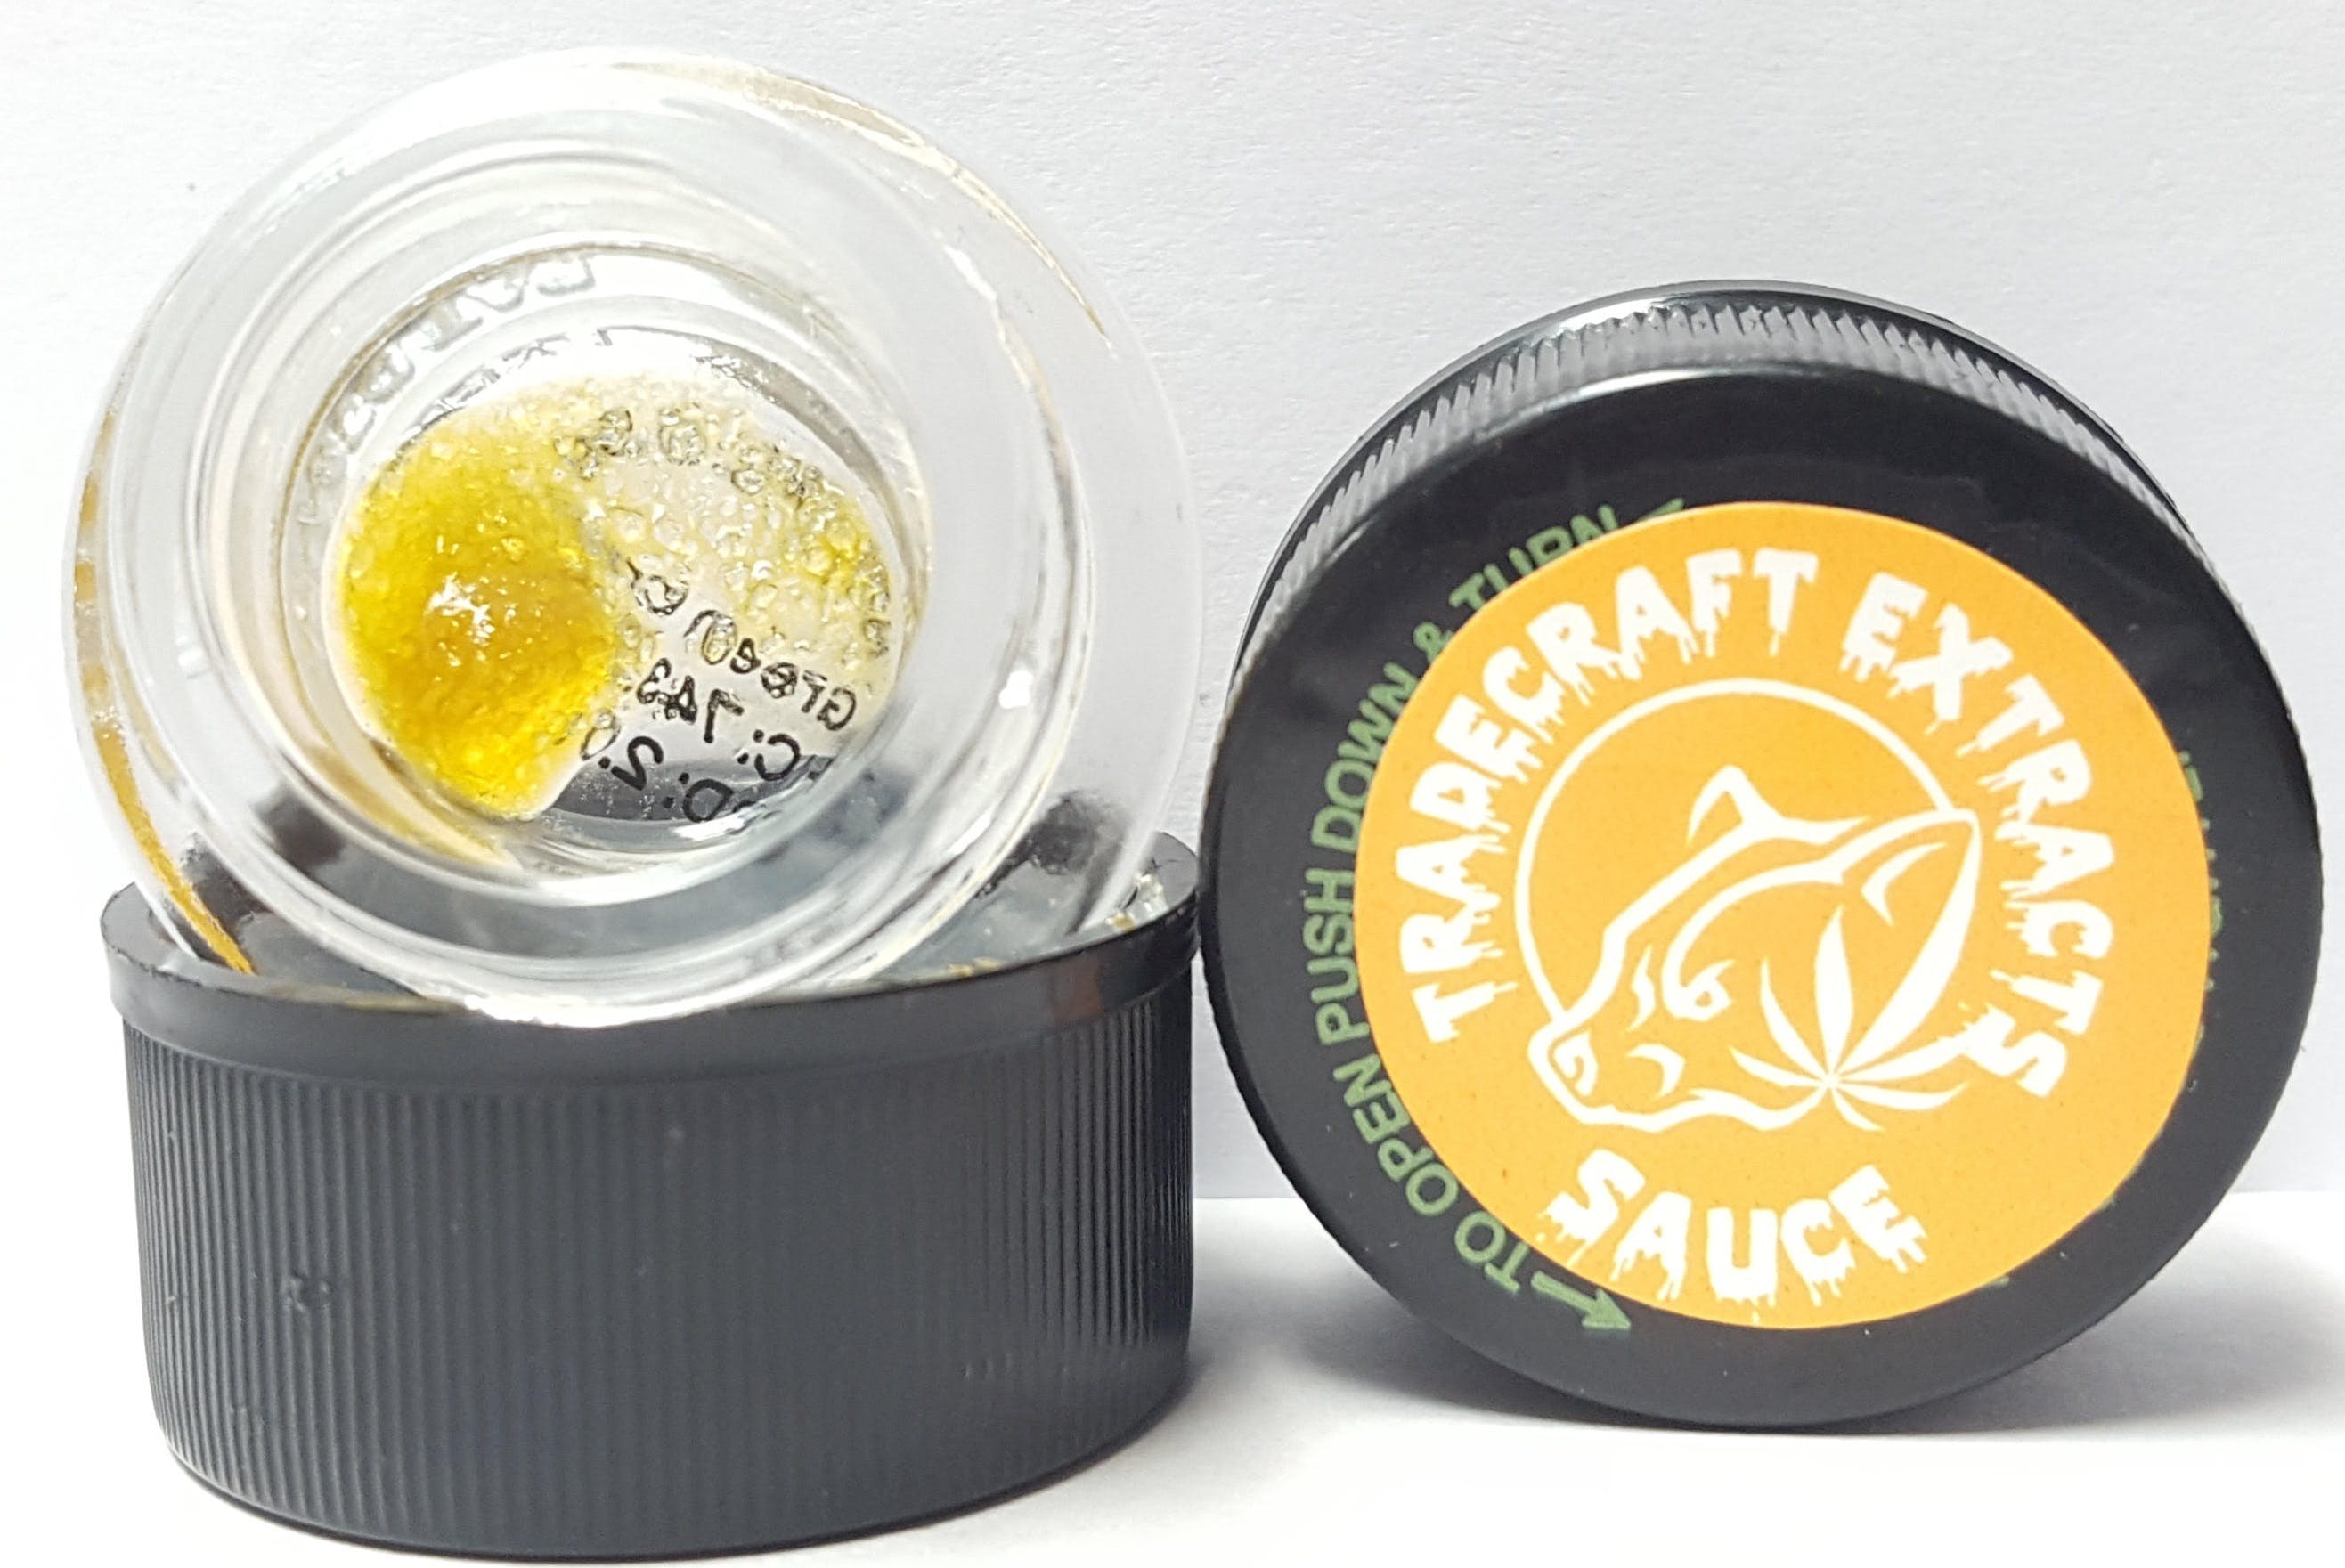 wax-trade-craft-extracts-green-crack-sauce